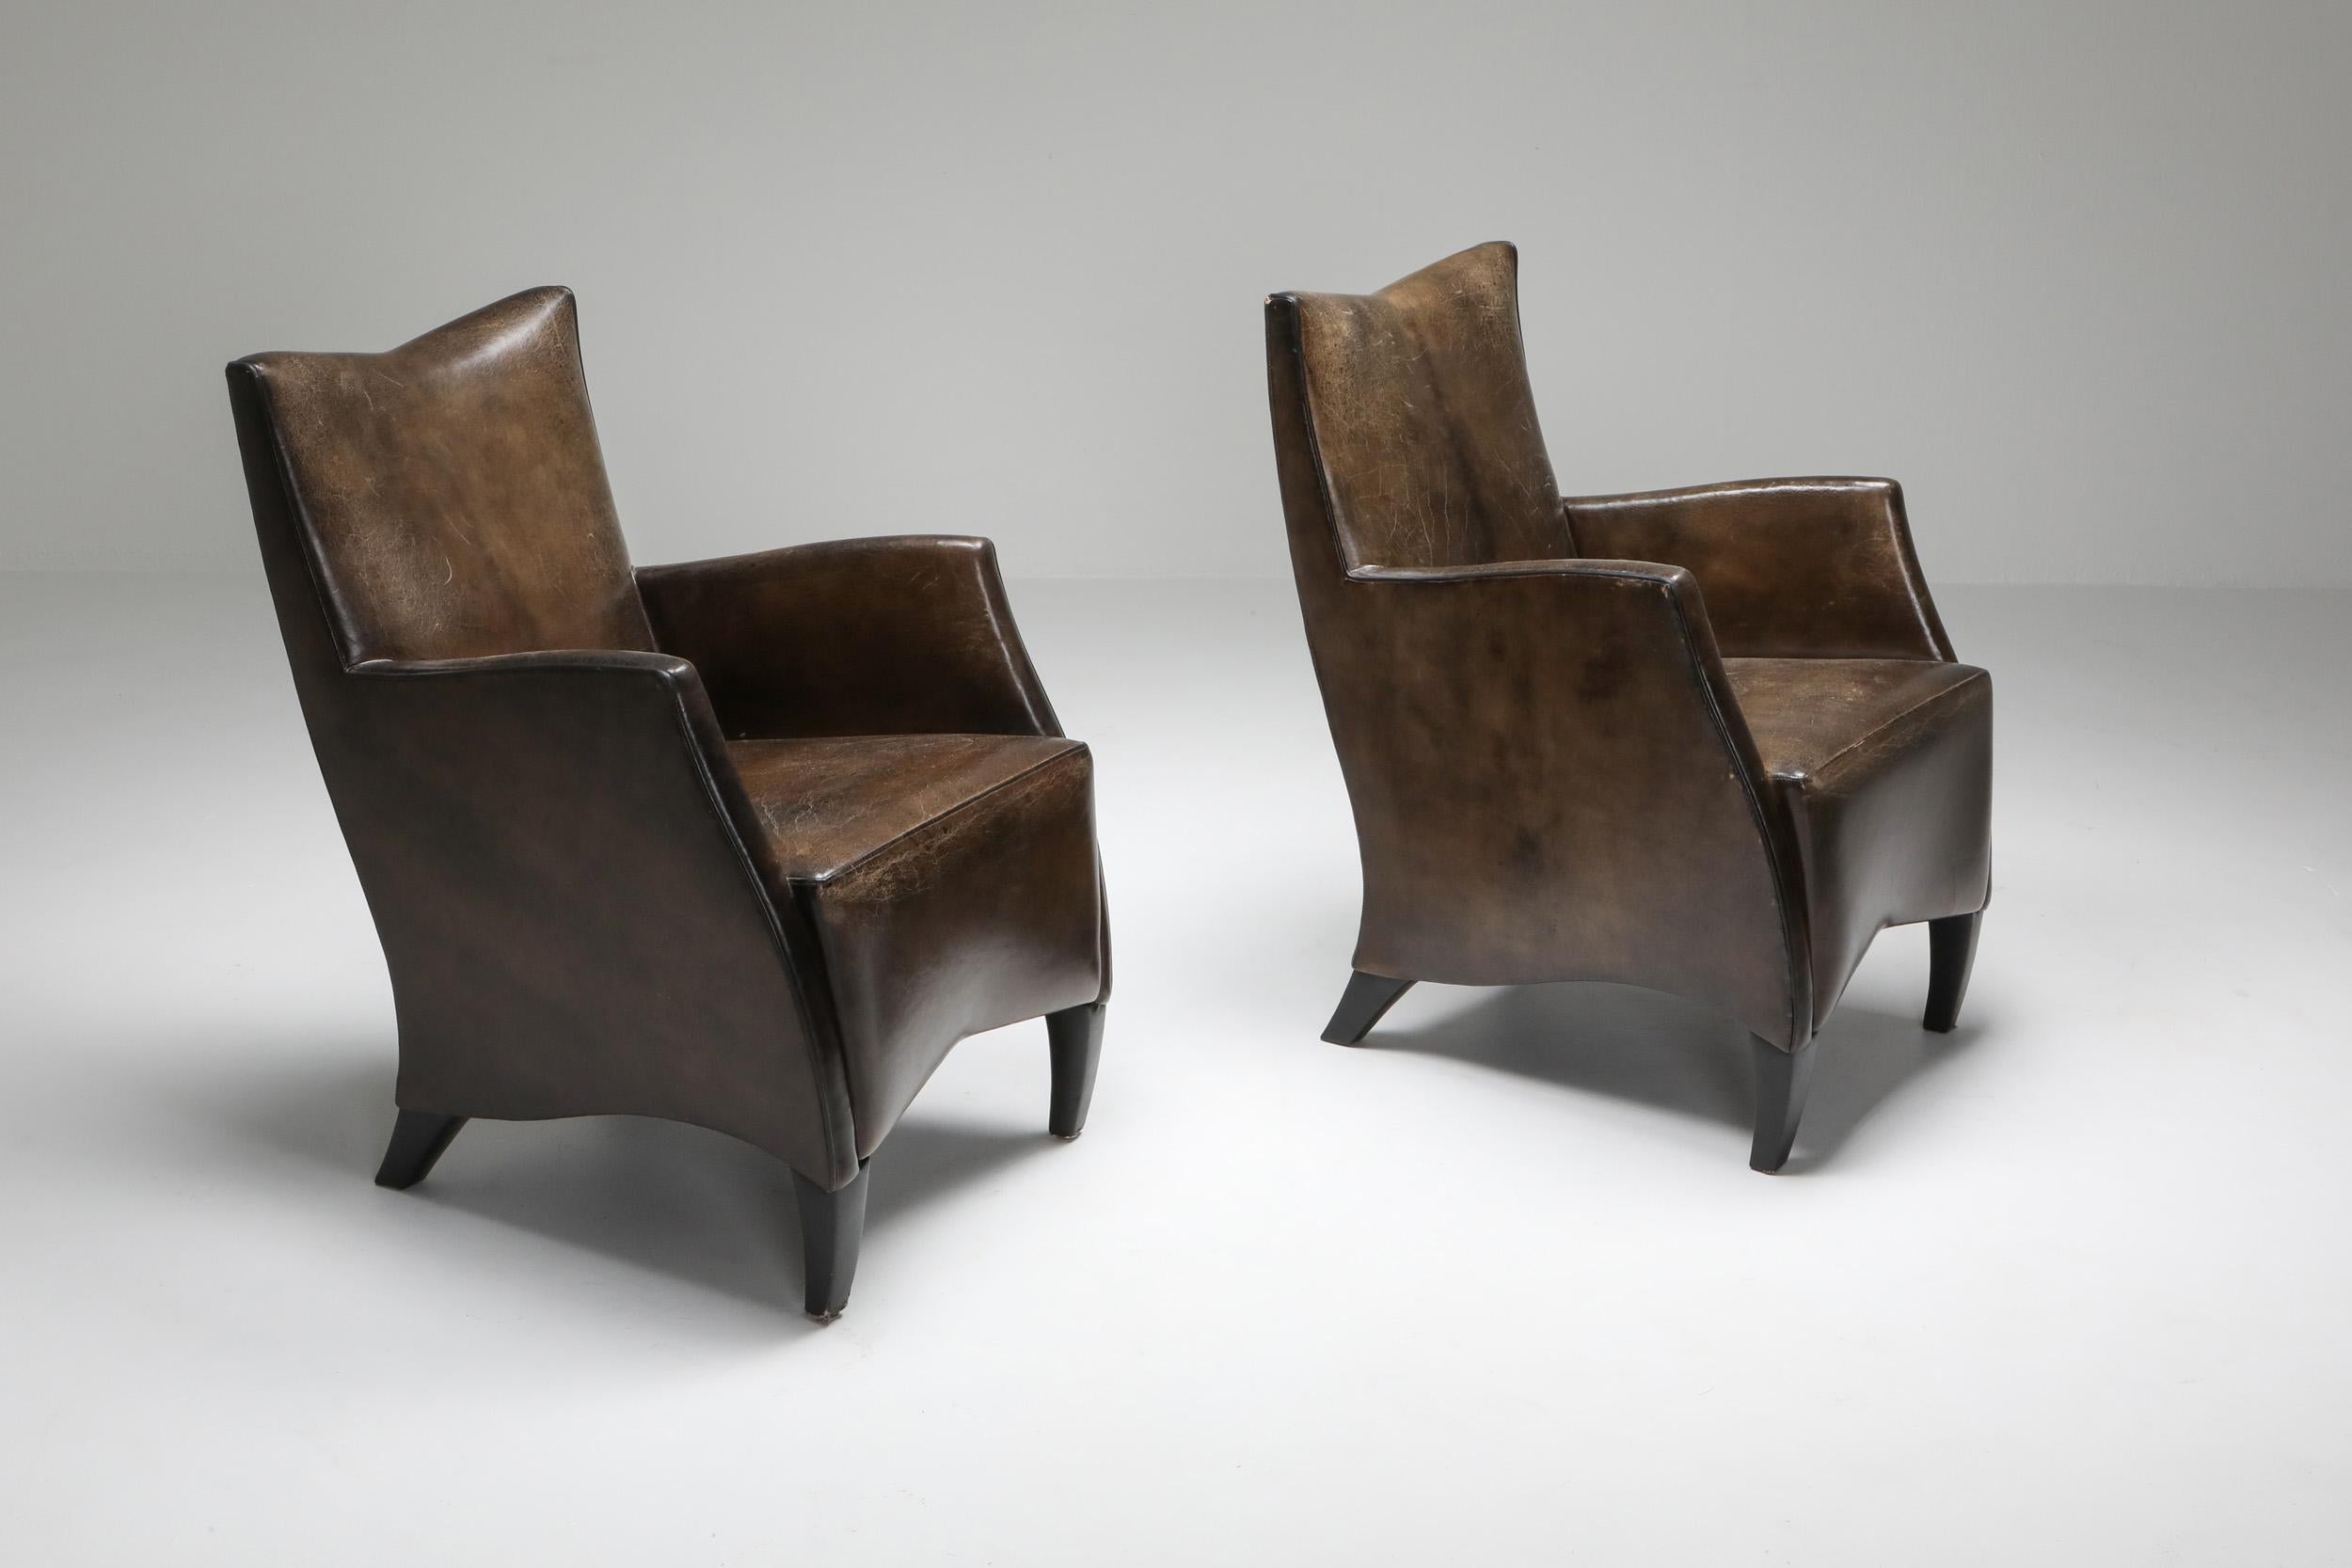 Leather armchairs by Bart Van Bekhoven, the Netherlands 1970s, set of six

In a style which is more contemporary and organic than Classic Art Deco, 
and an unmatched quality as even the legs are covered in leather. 
A true master in patinating